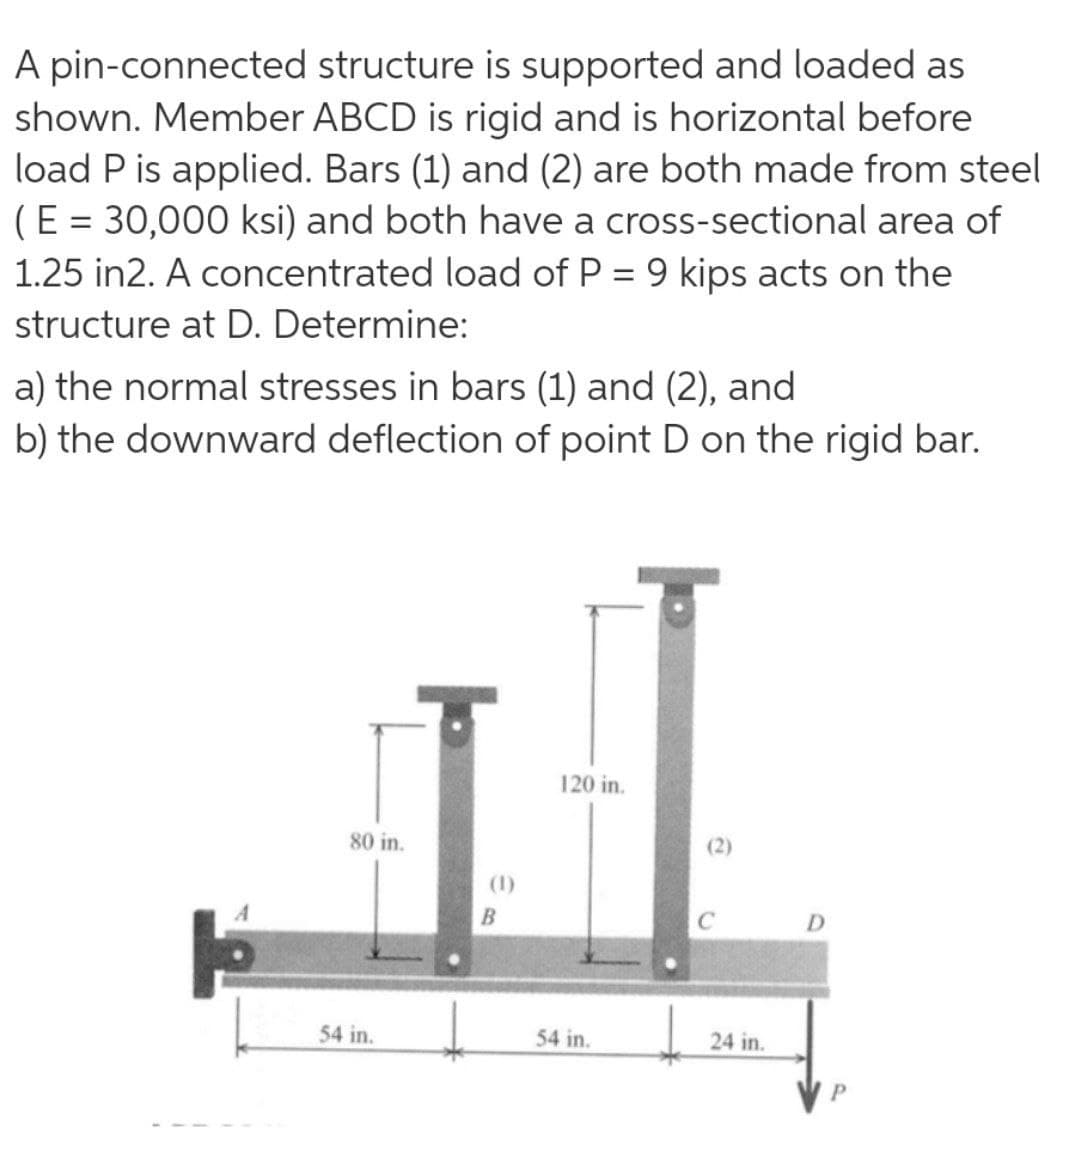 A pin-connected structure is supported and loaded as
shown. Member ABCD is rigid and is horizontal before
load P is applied. Bars (1) and (2) are both made from steel
(E = 30,000 ksi) and both have a cross-sectional area of
1.25 in2. A concentrated load of P = 9 kips acts on the
%3D
structure at D. Determine:
a) the normal stresses in bars (1) and (2), and
b) the downward deflection of point D on the rigid bar.
120 in.
80 in.
(2)
(1)
D.
54 in.
54 in.
24 in.
